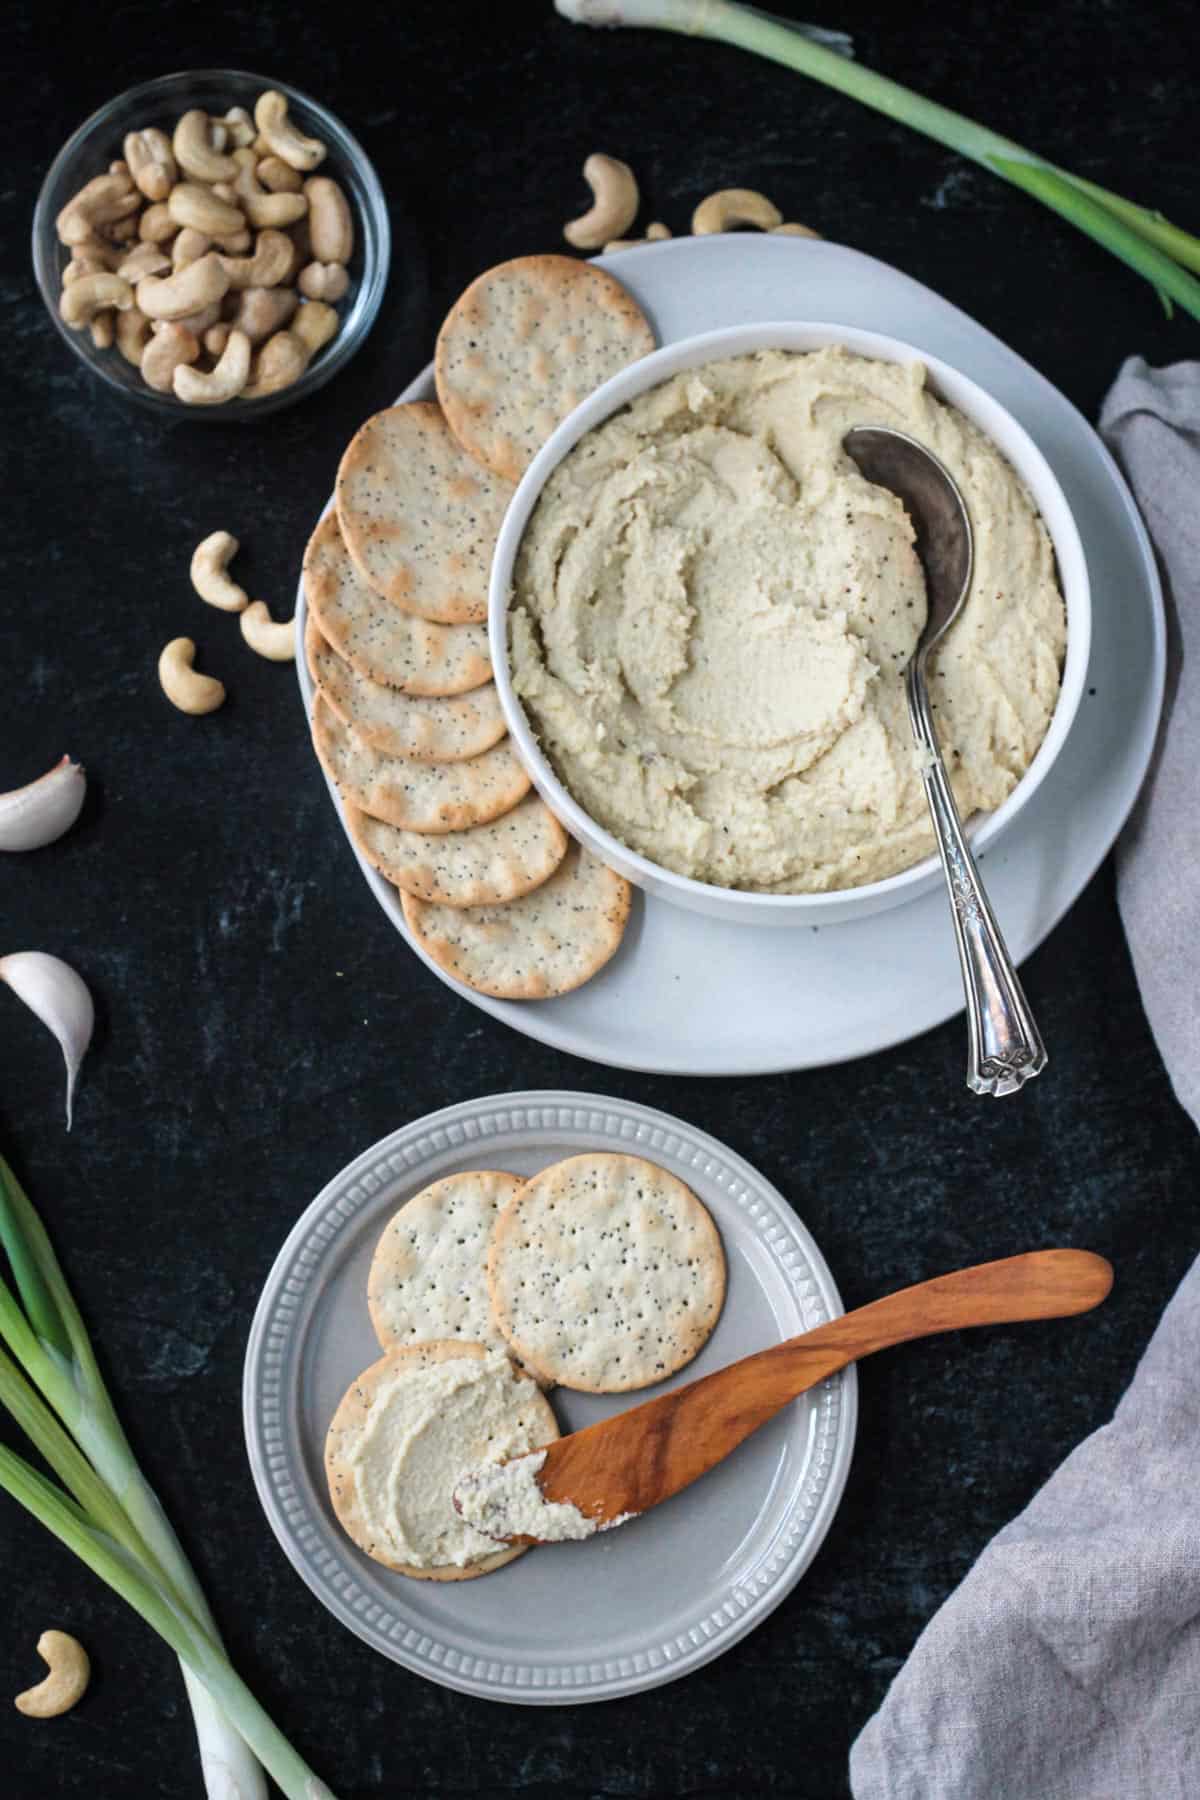 Bowl of ricotta spread next to a plate of crackers.